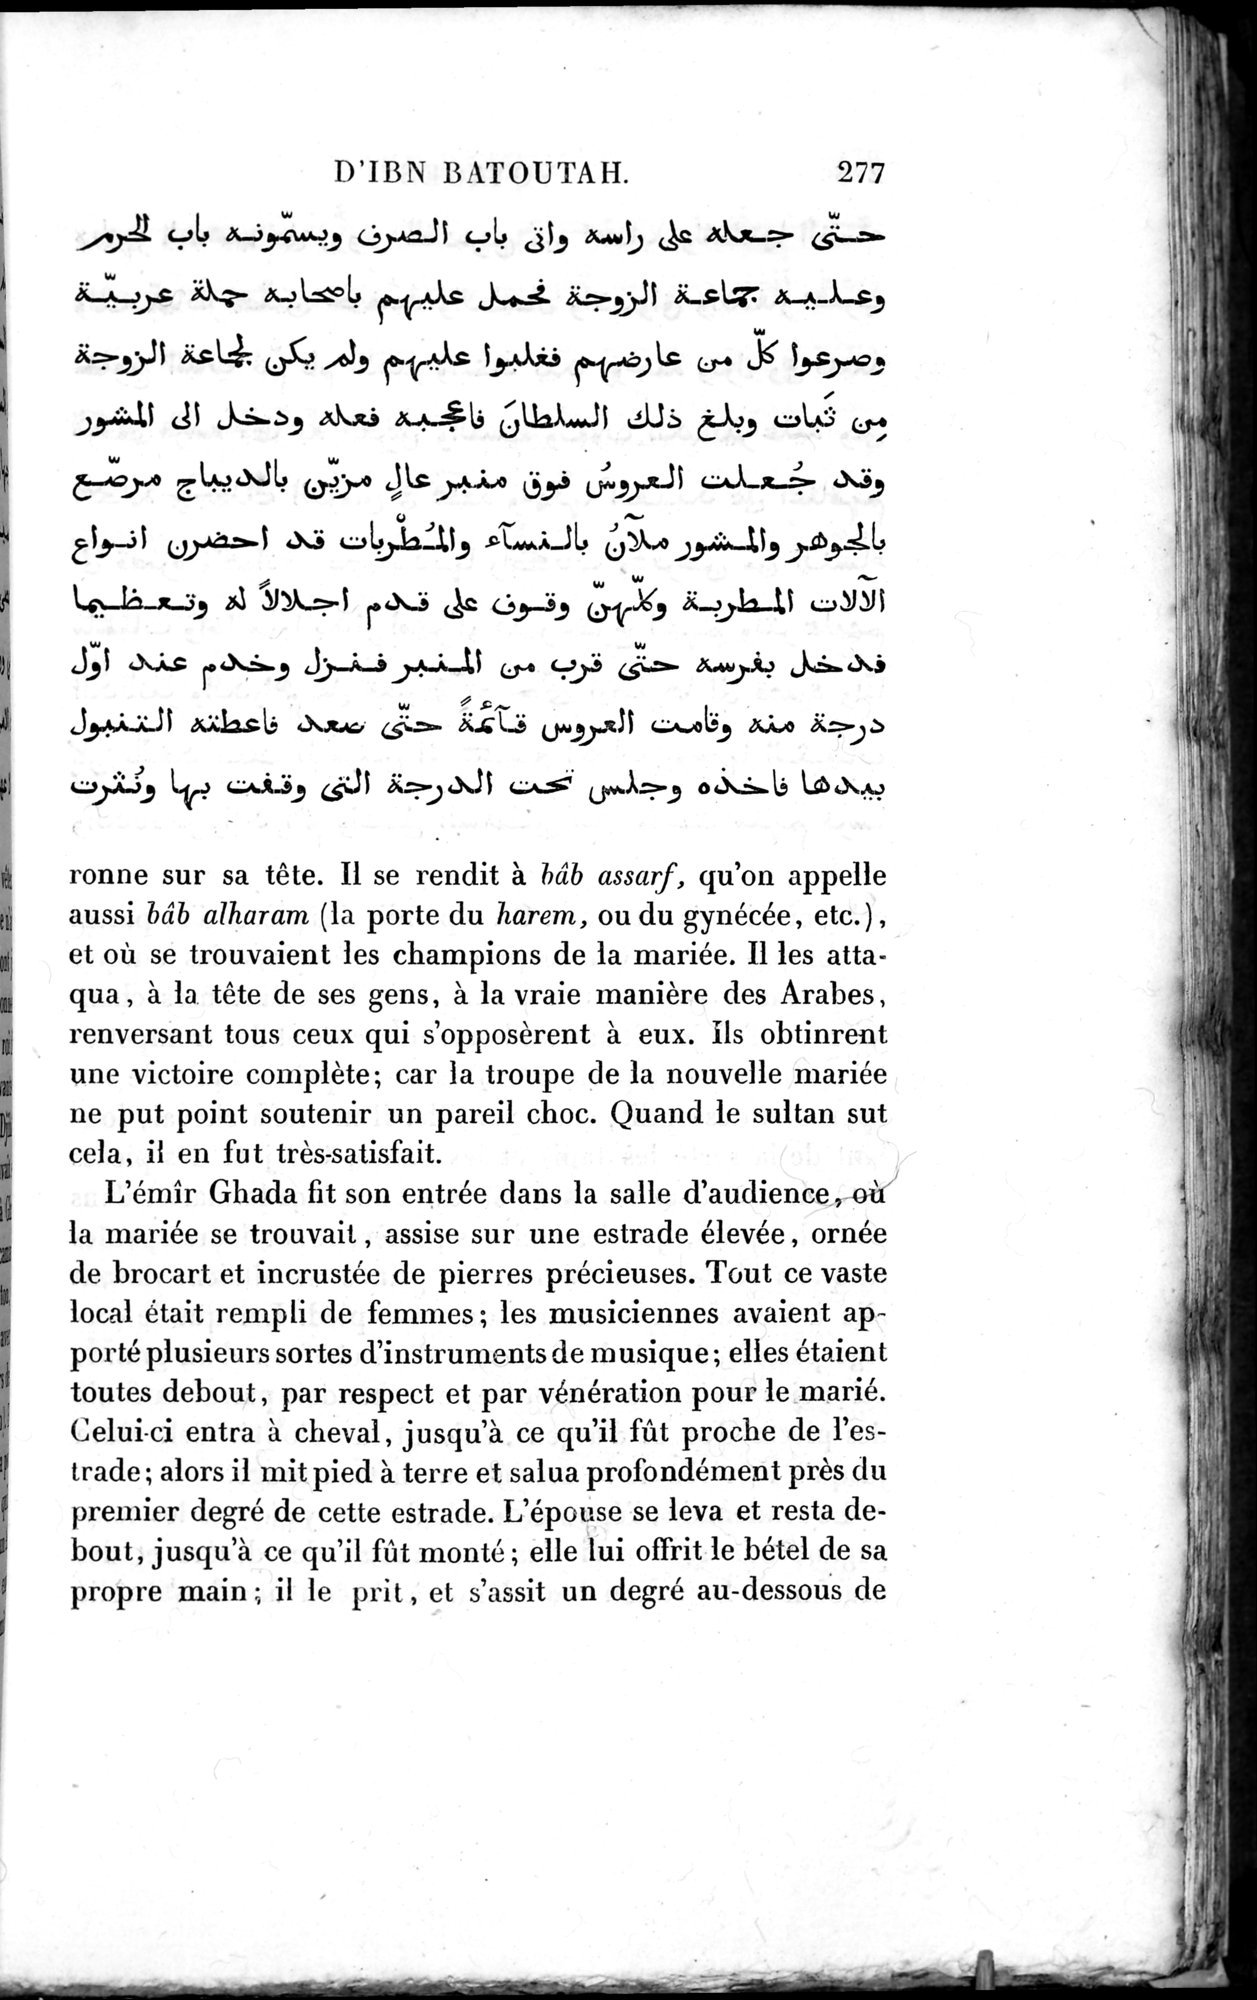 Voyages d'Ibn Batoutah : vol.3 / Page 317 (Grayscale High Resolution Image)